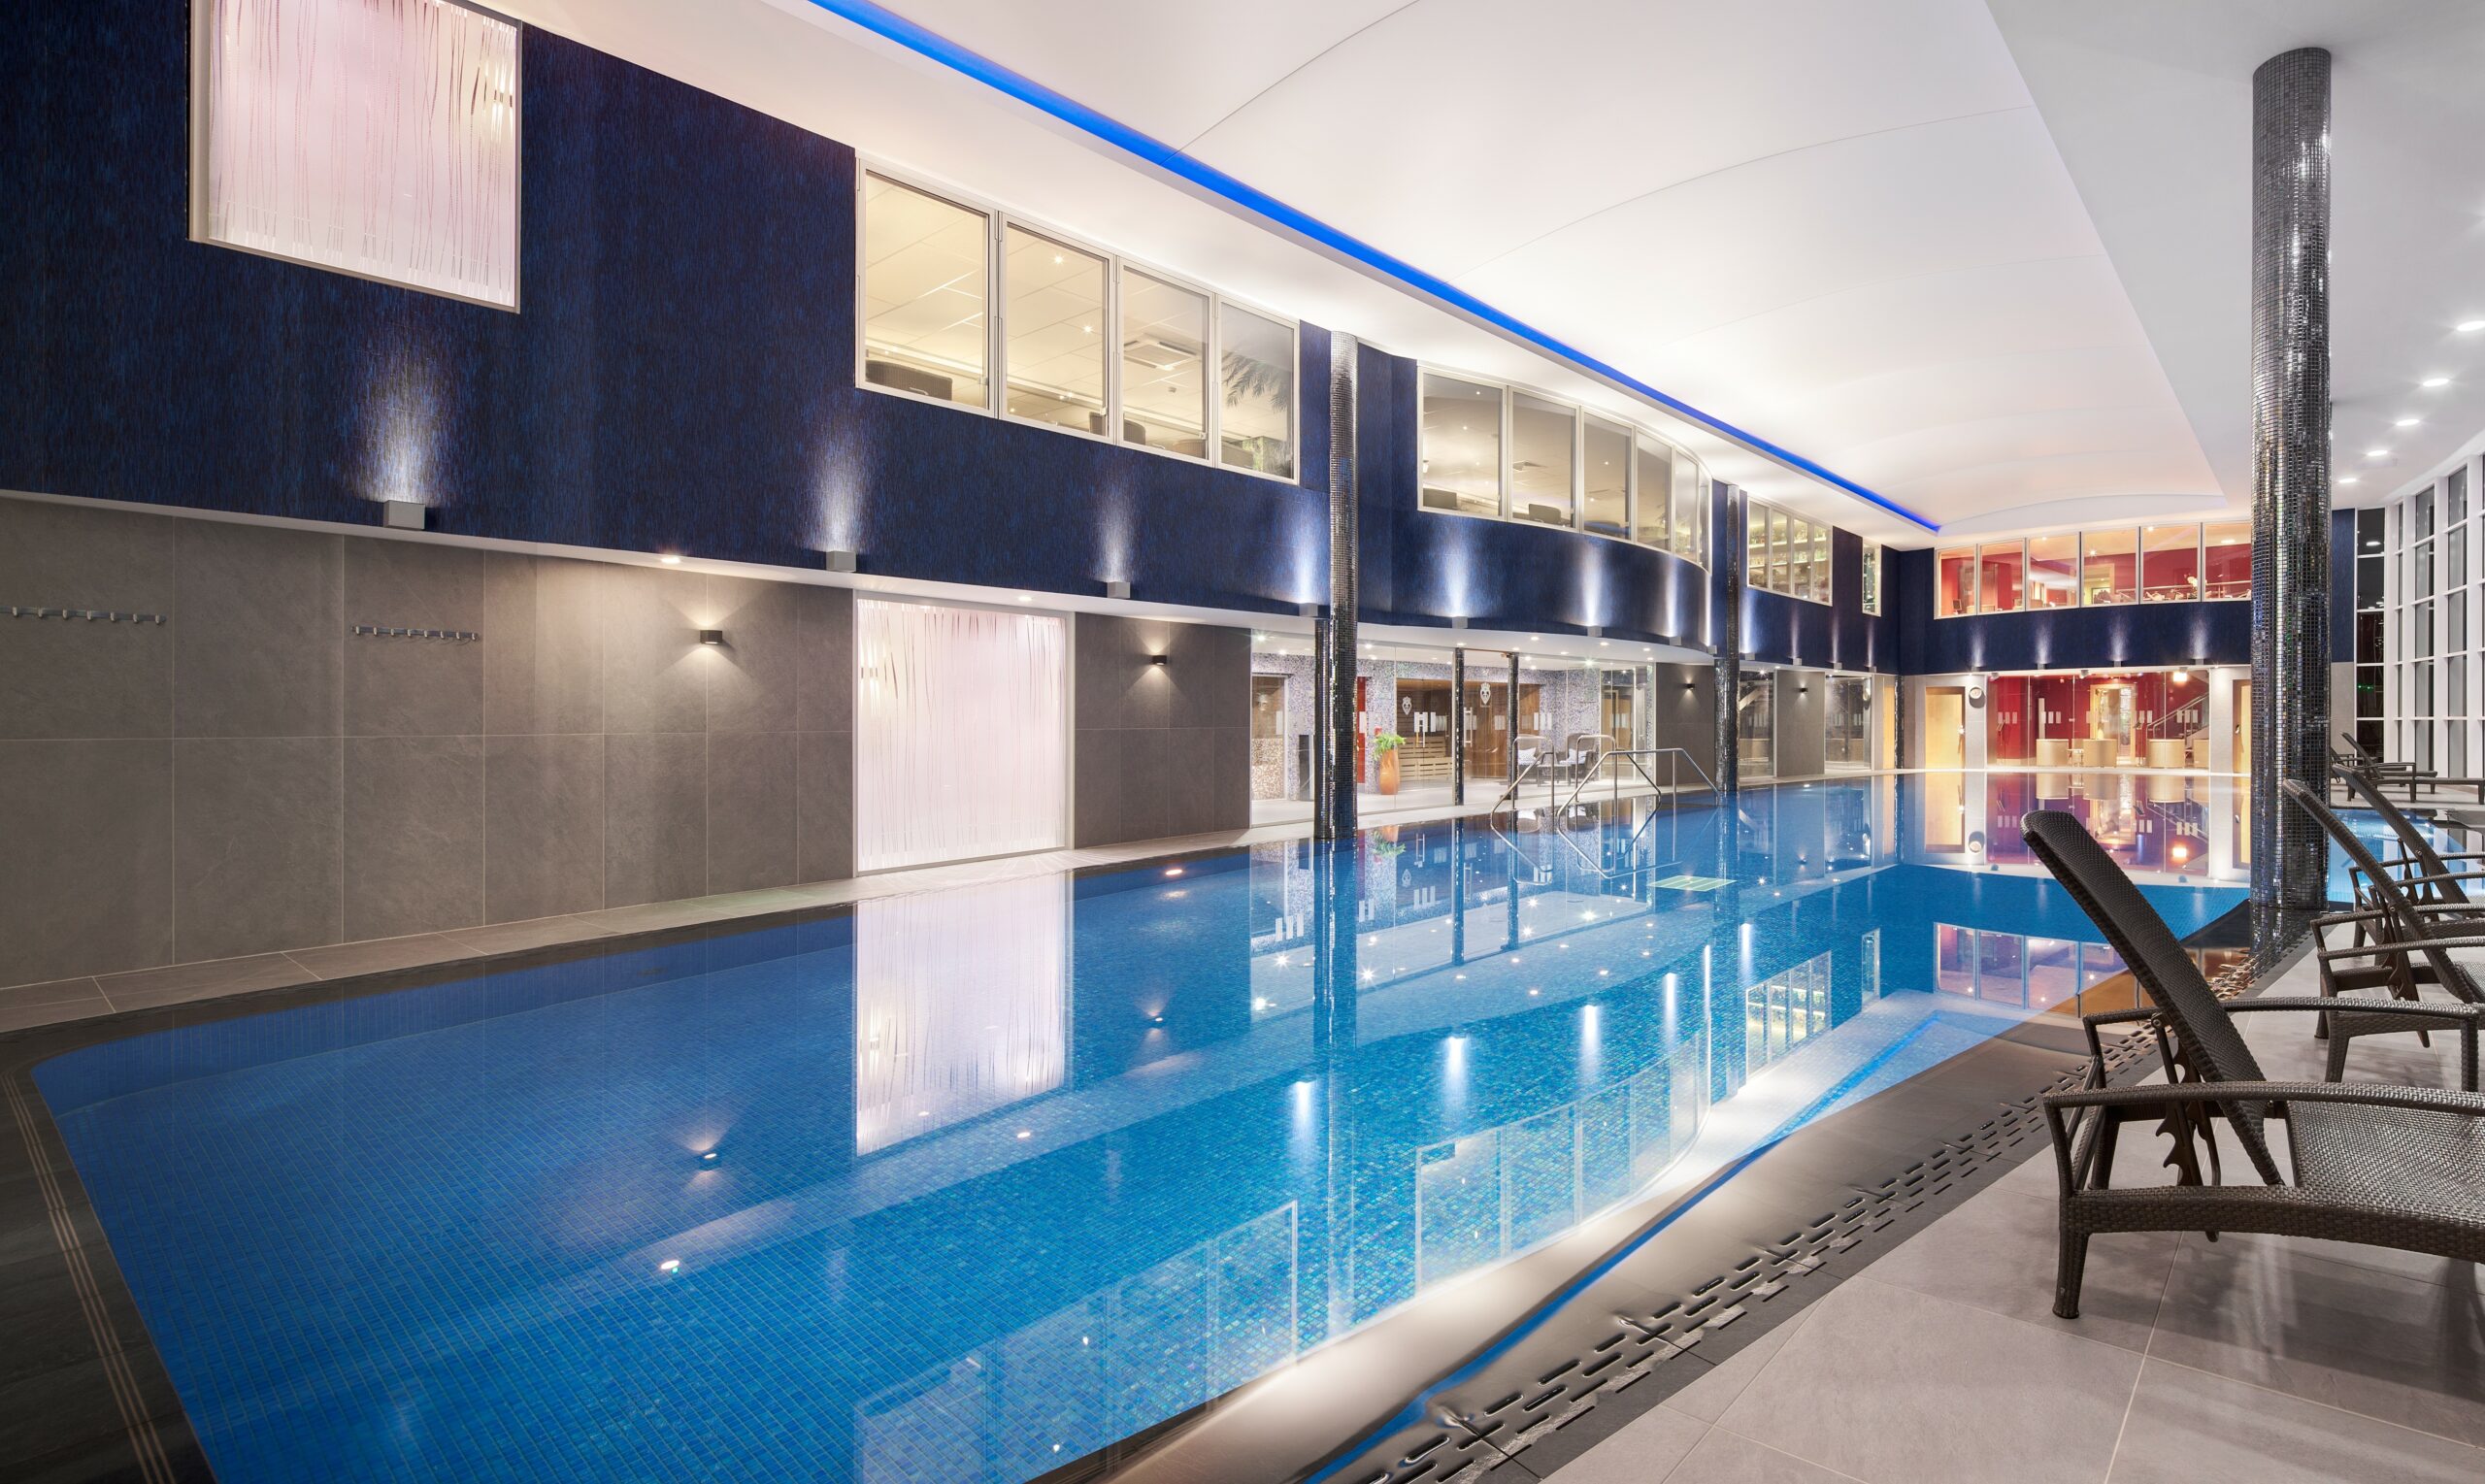 Swimming pool. Stobo Castle is among the scottish businesses you can visit to search forChristmas gifts